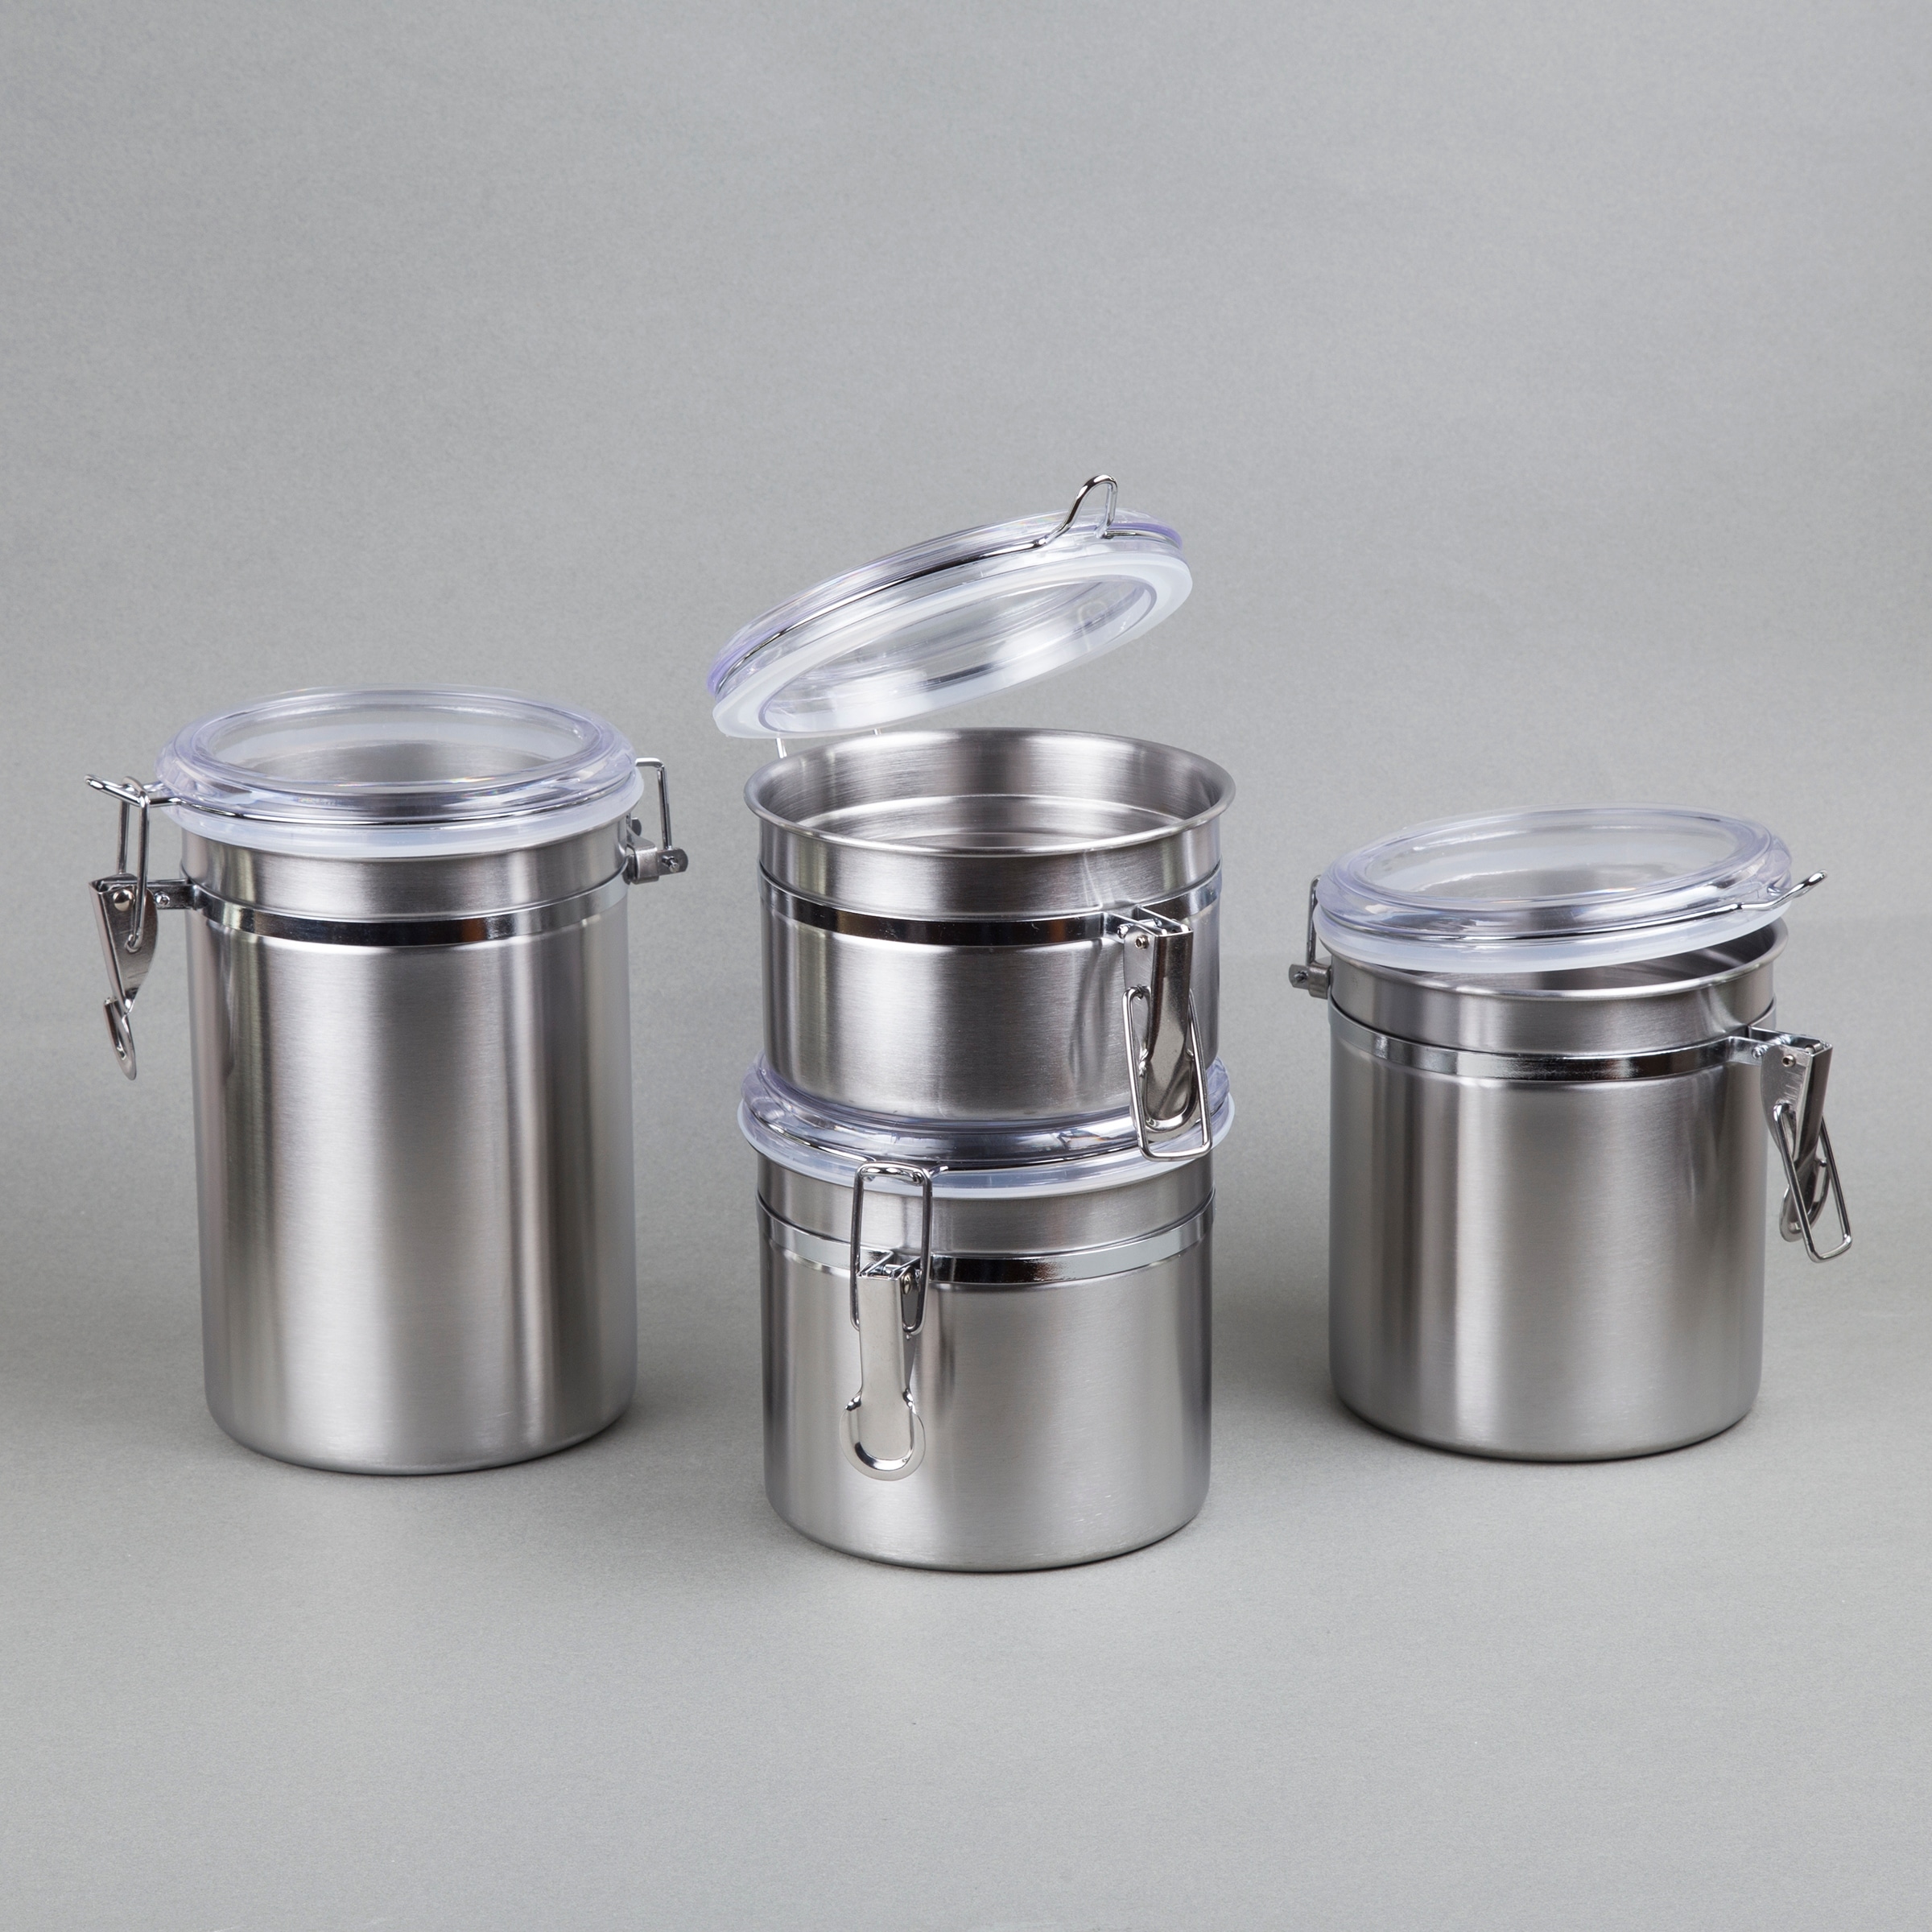 https://ak1.ostkcdn.com/images/products/is/images/direct/45b9a995419084e3b2514d49a6ce231c261f92b6/Creative-Home-4-Piece-Canister-Container-Set-with-Air-Tight-Lid-and-Locking-Clamp%2C-Stainless-Steel.jpg